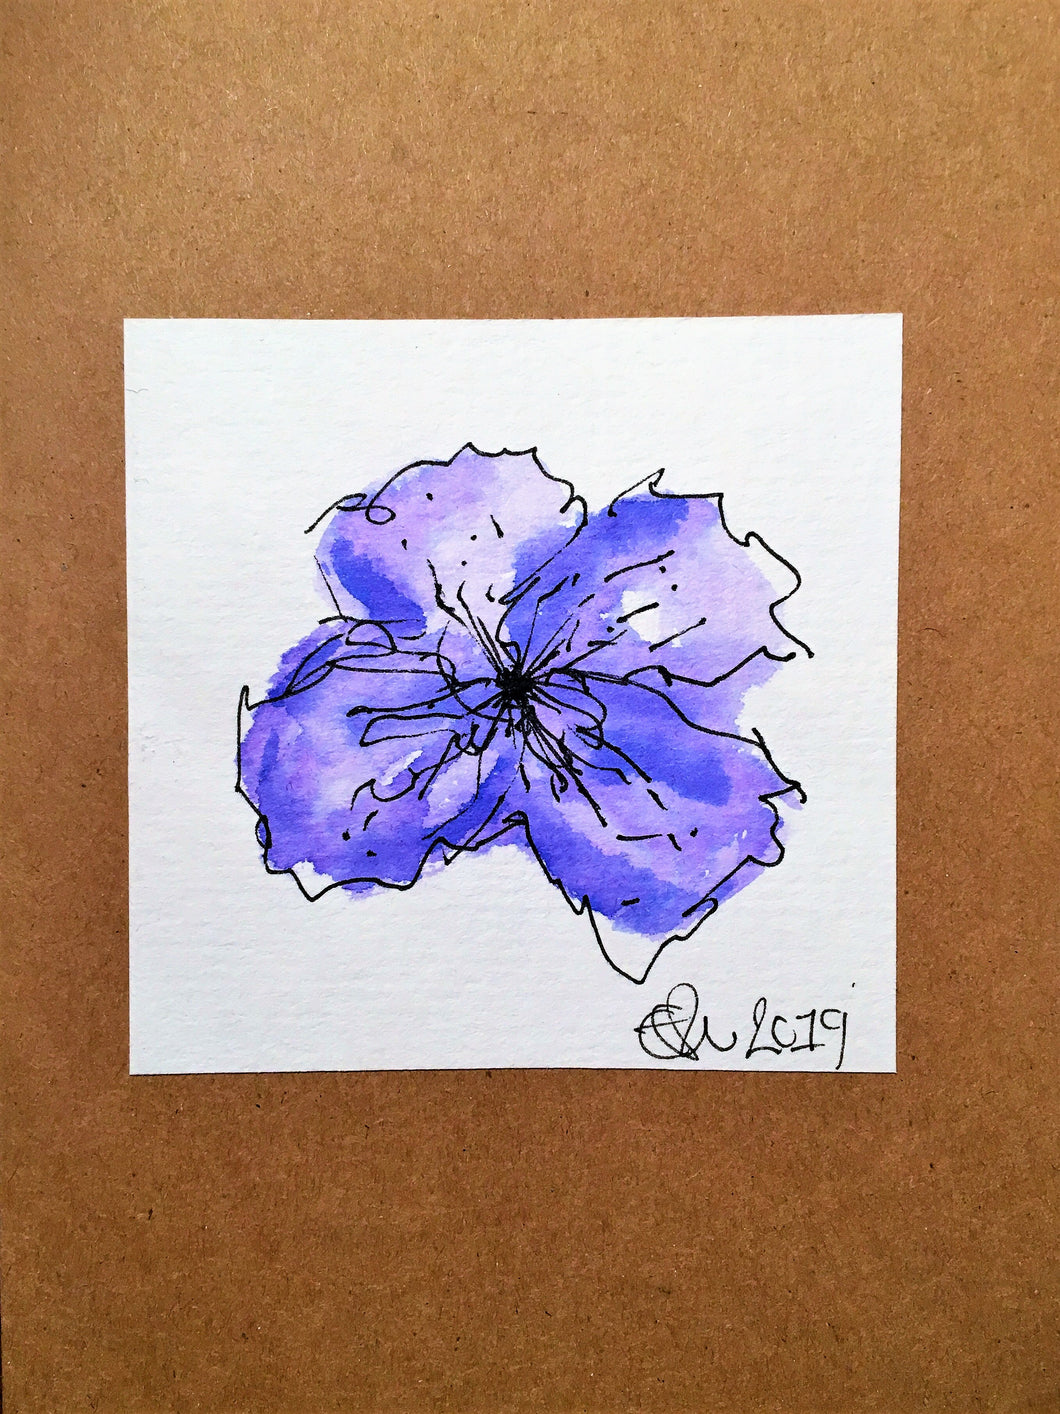 Handpainted Watercolour Greeting Card - Abstract Purple Pansy Flower Design - eDgE dEsiGn London